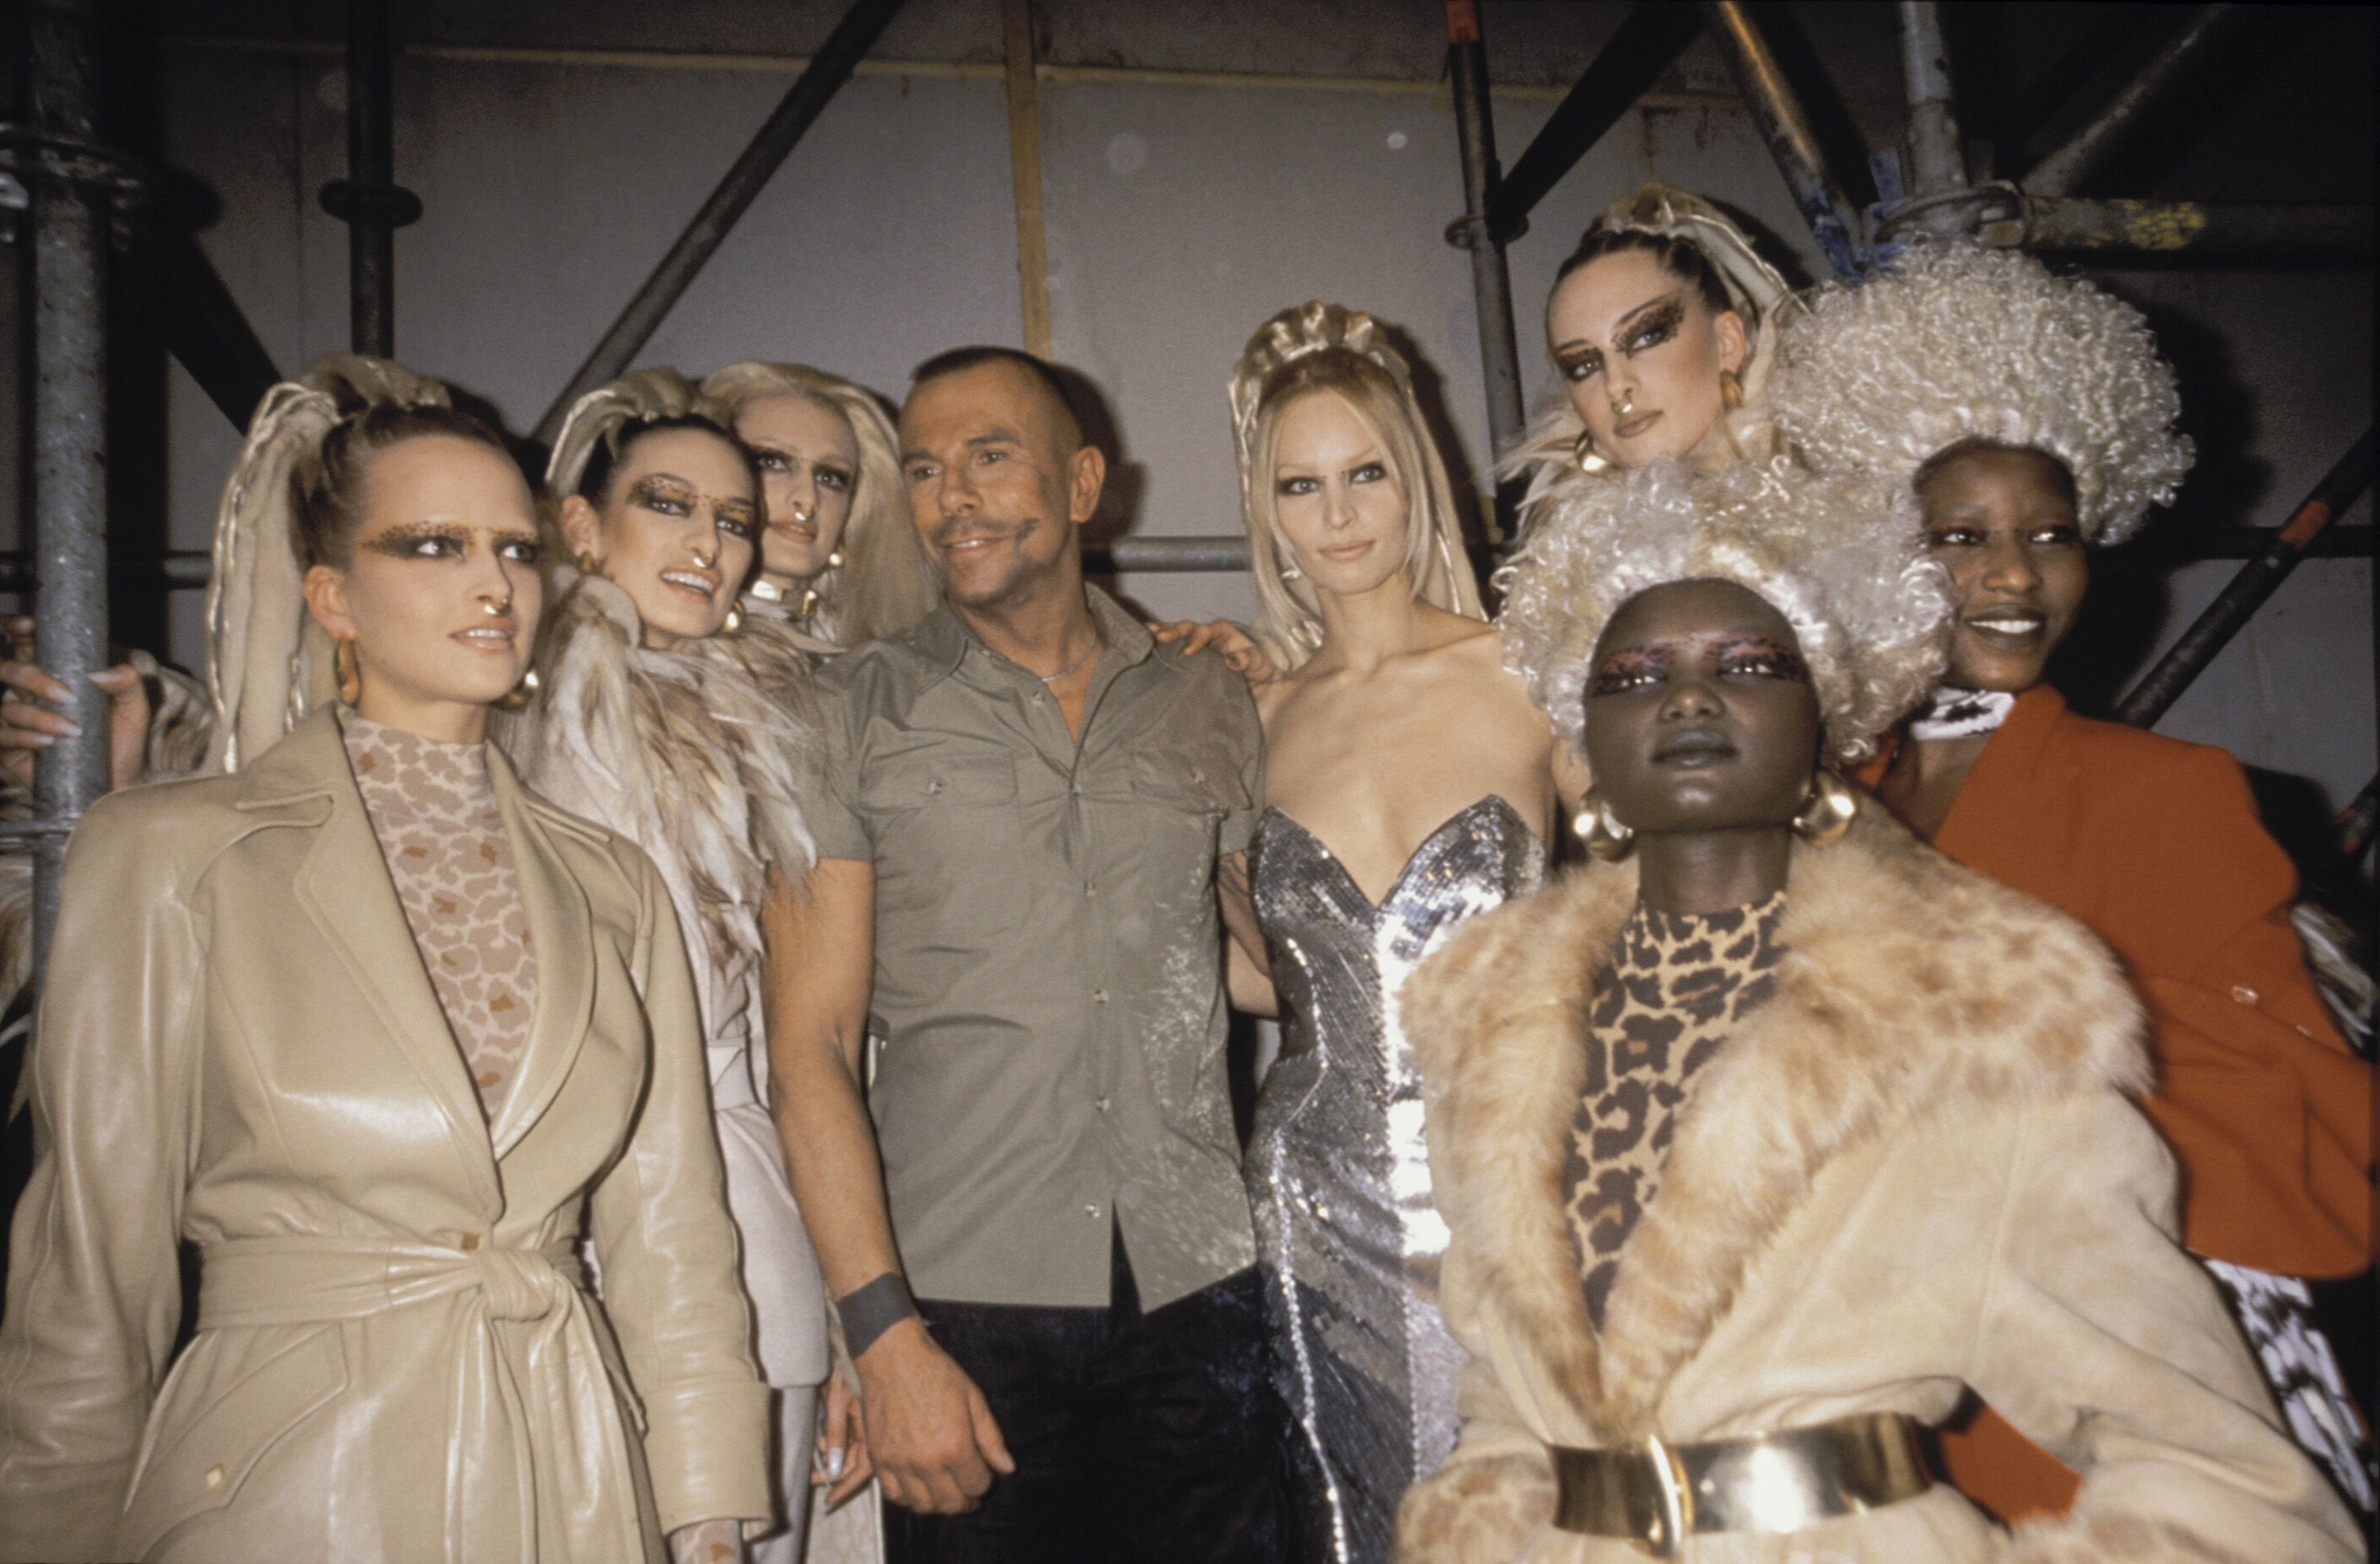 Thierry Mugler's Everlasting Impact on Fashion: His Life And Designs